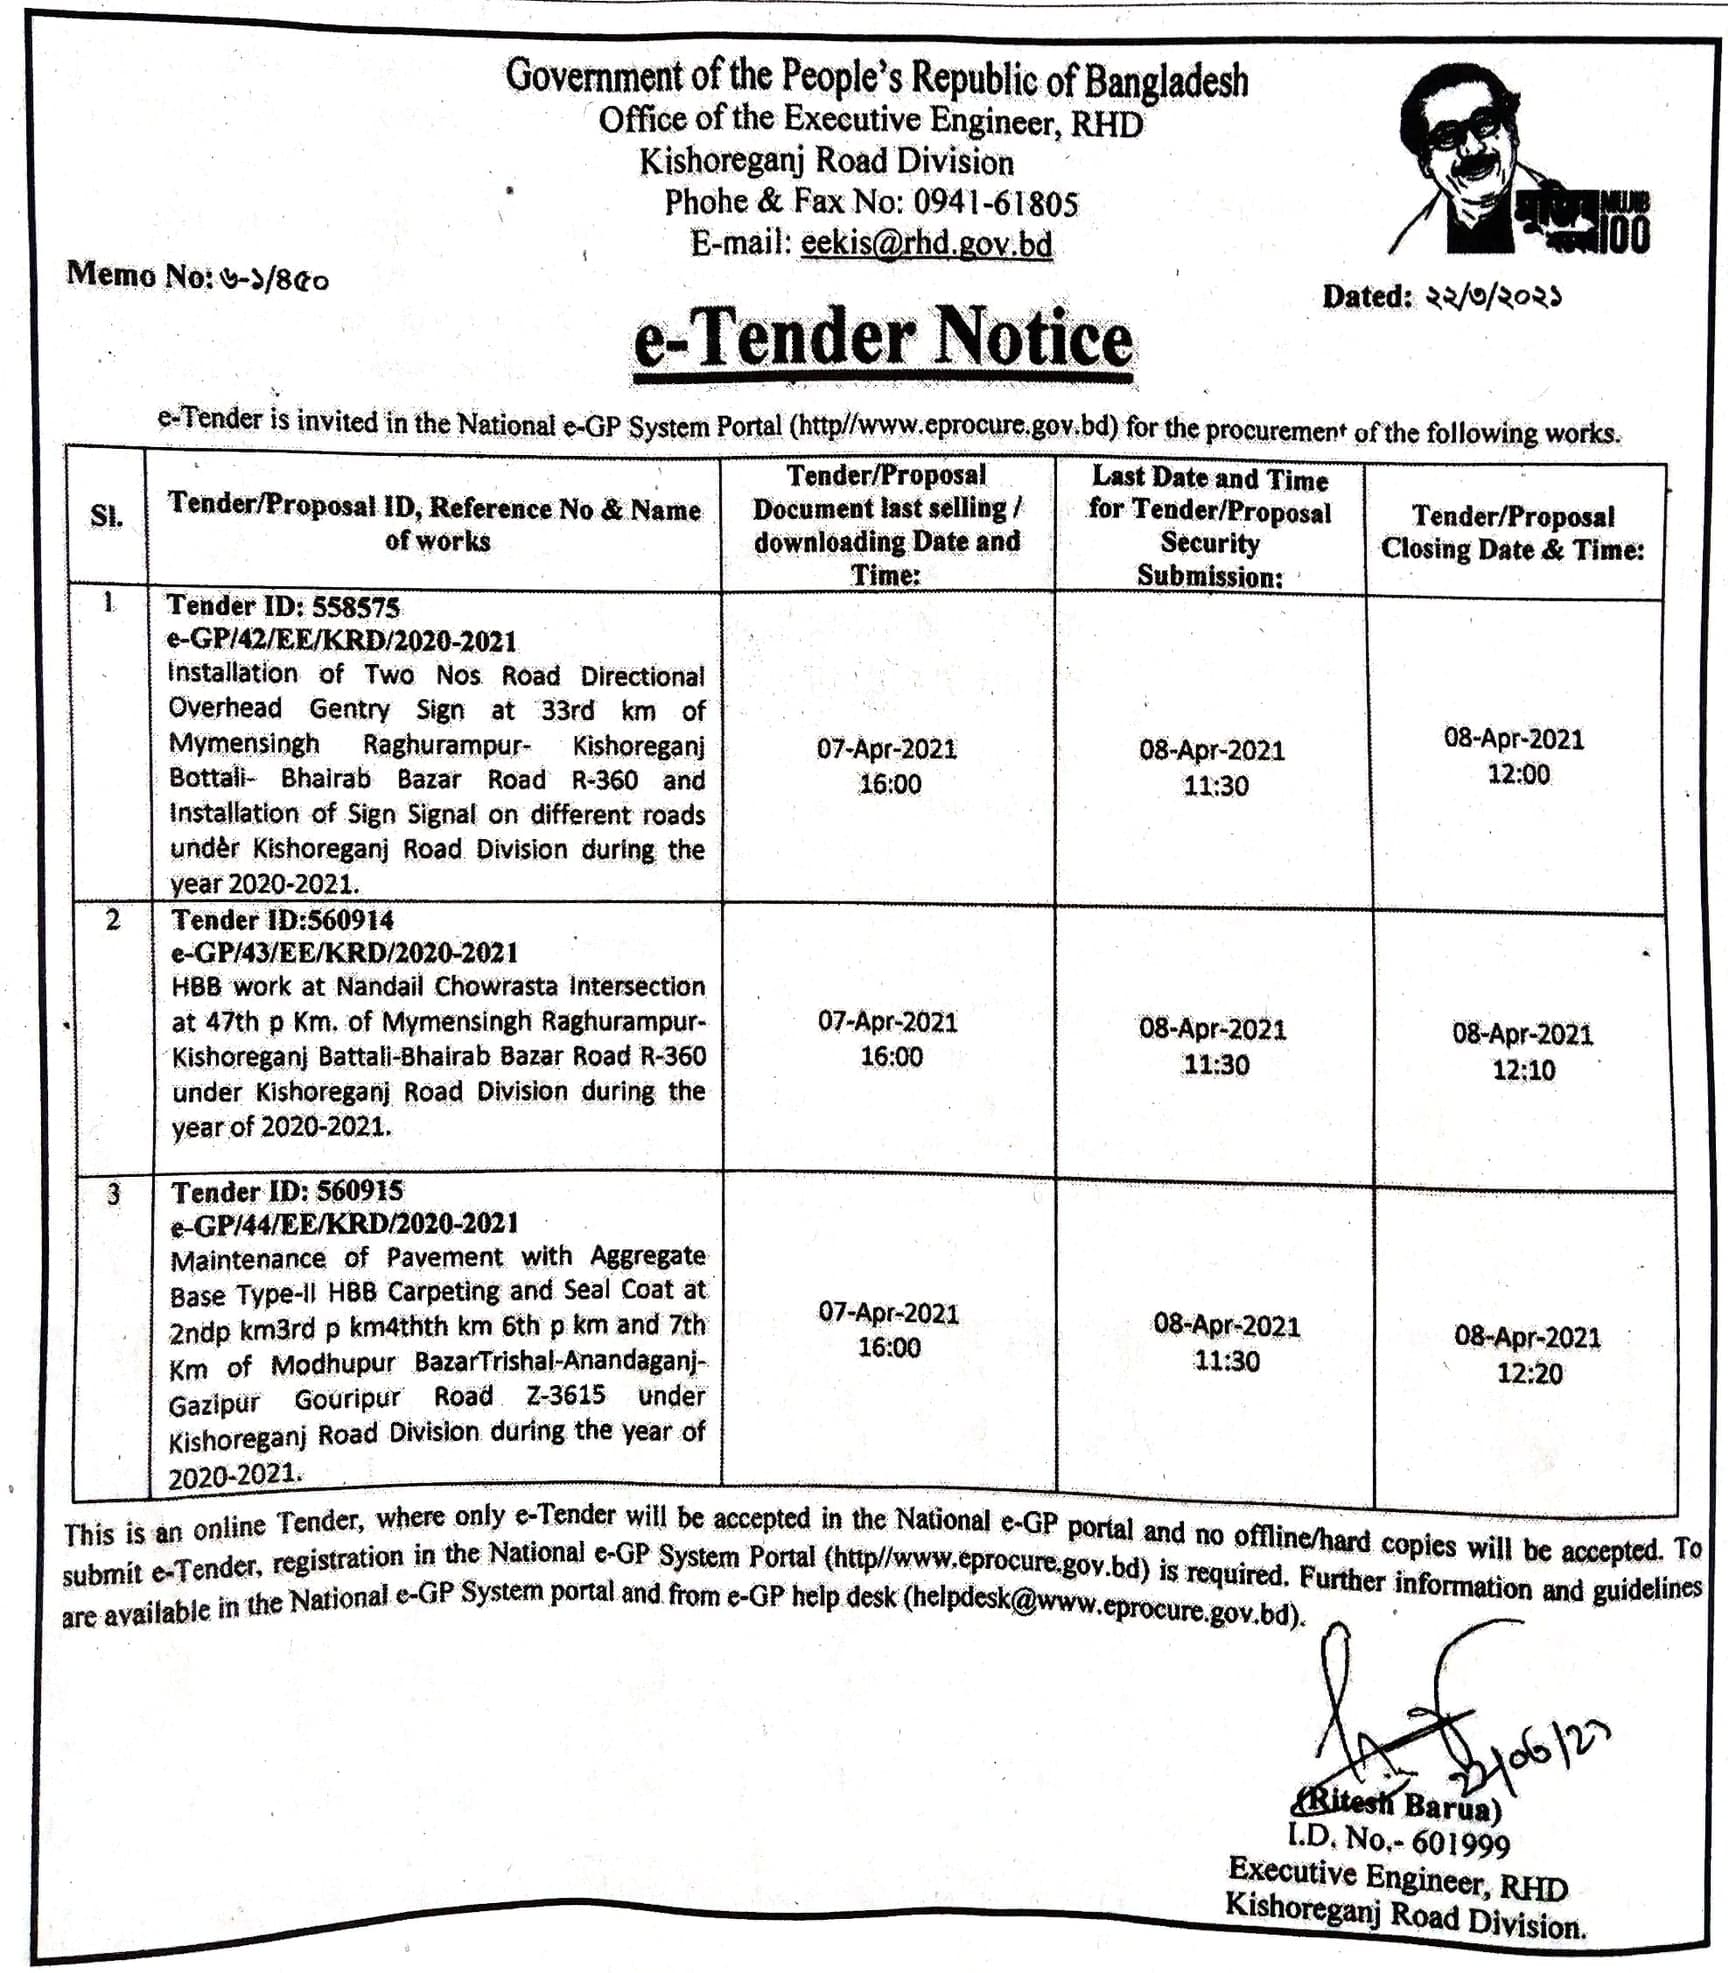 e- Tender Notice-Government of the People’s Republic of Bangladesh